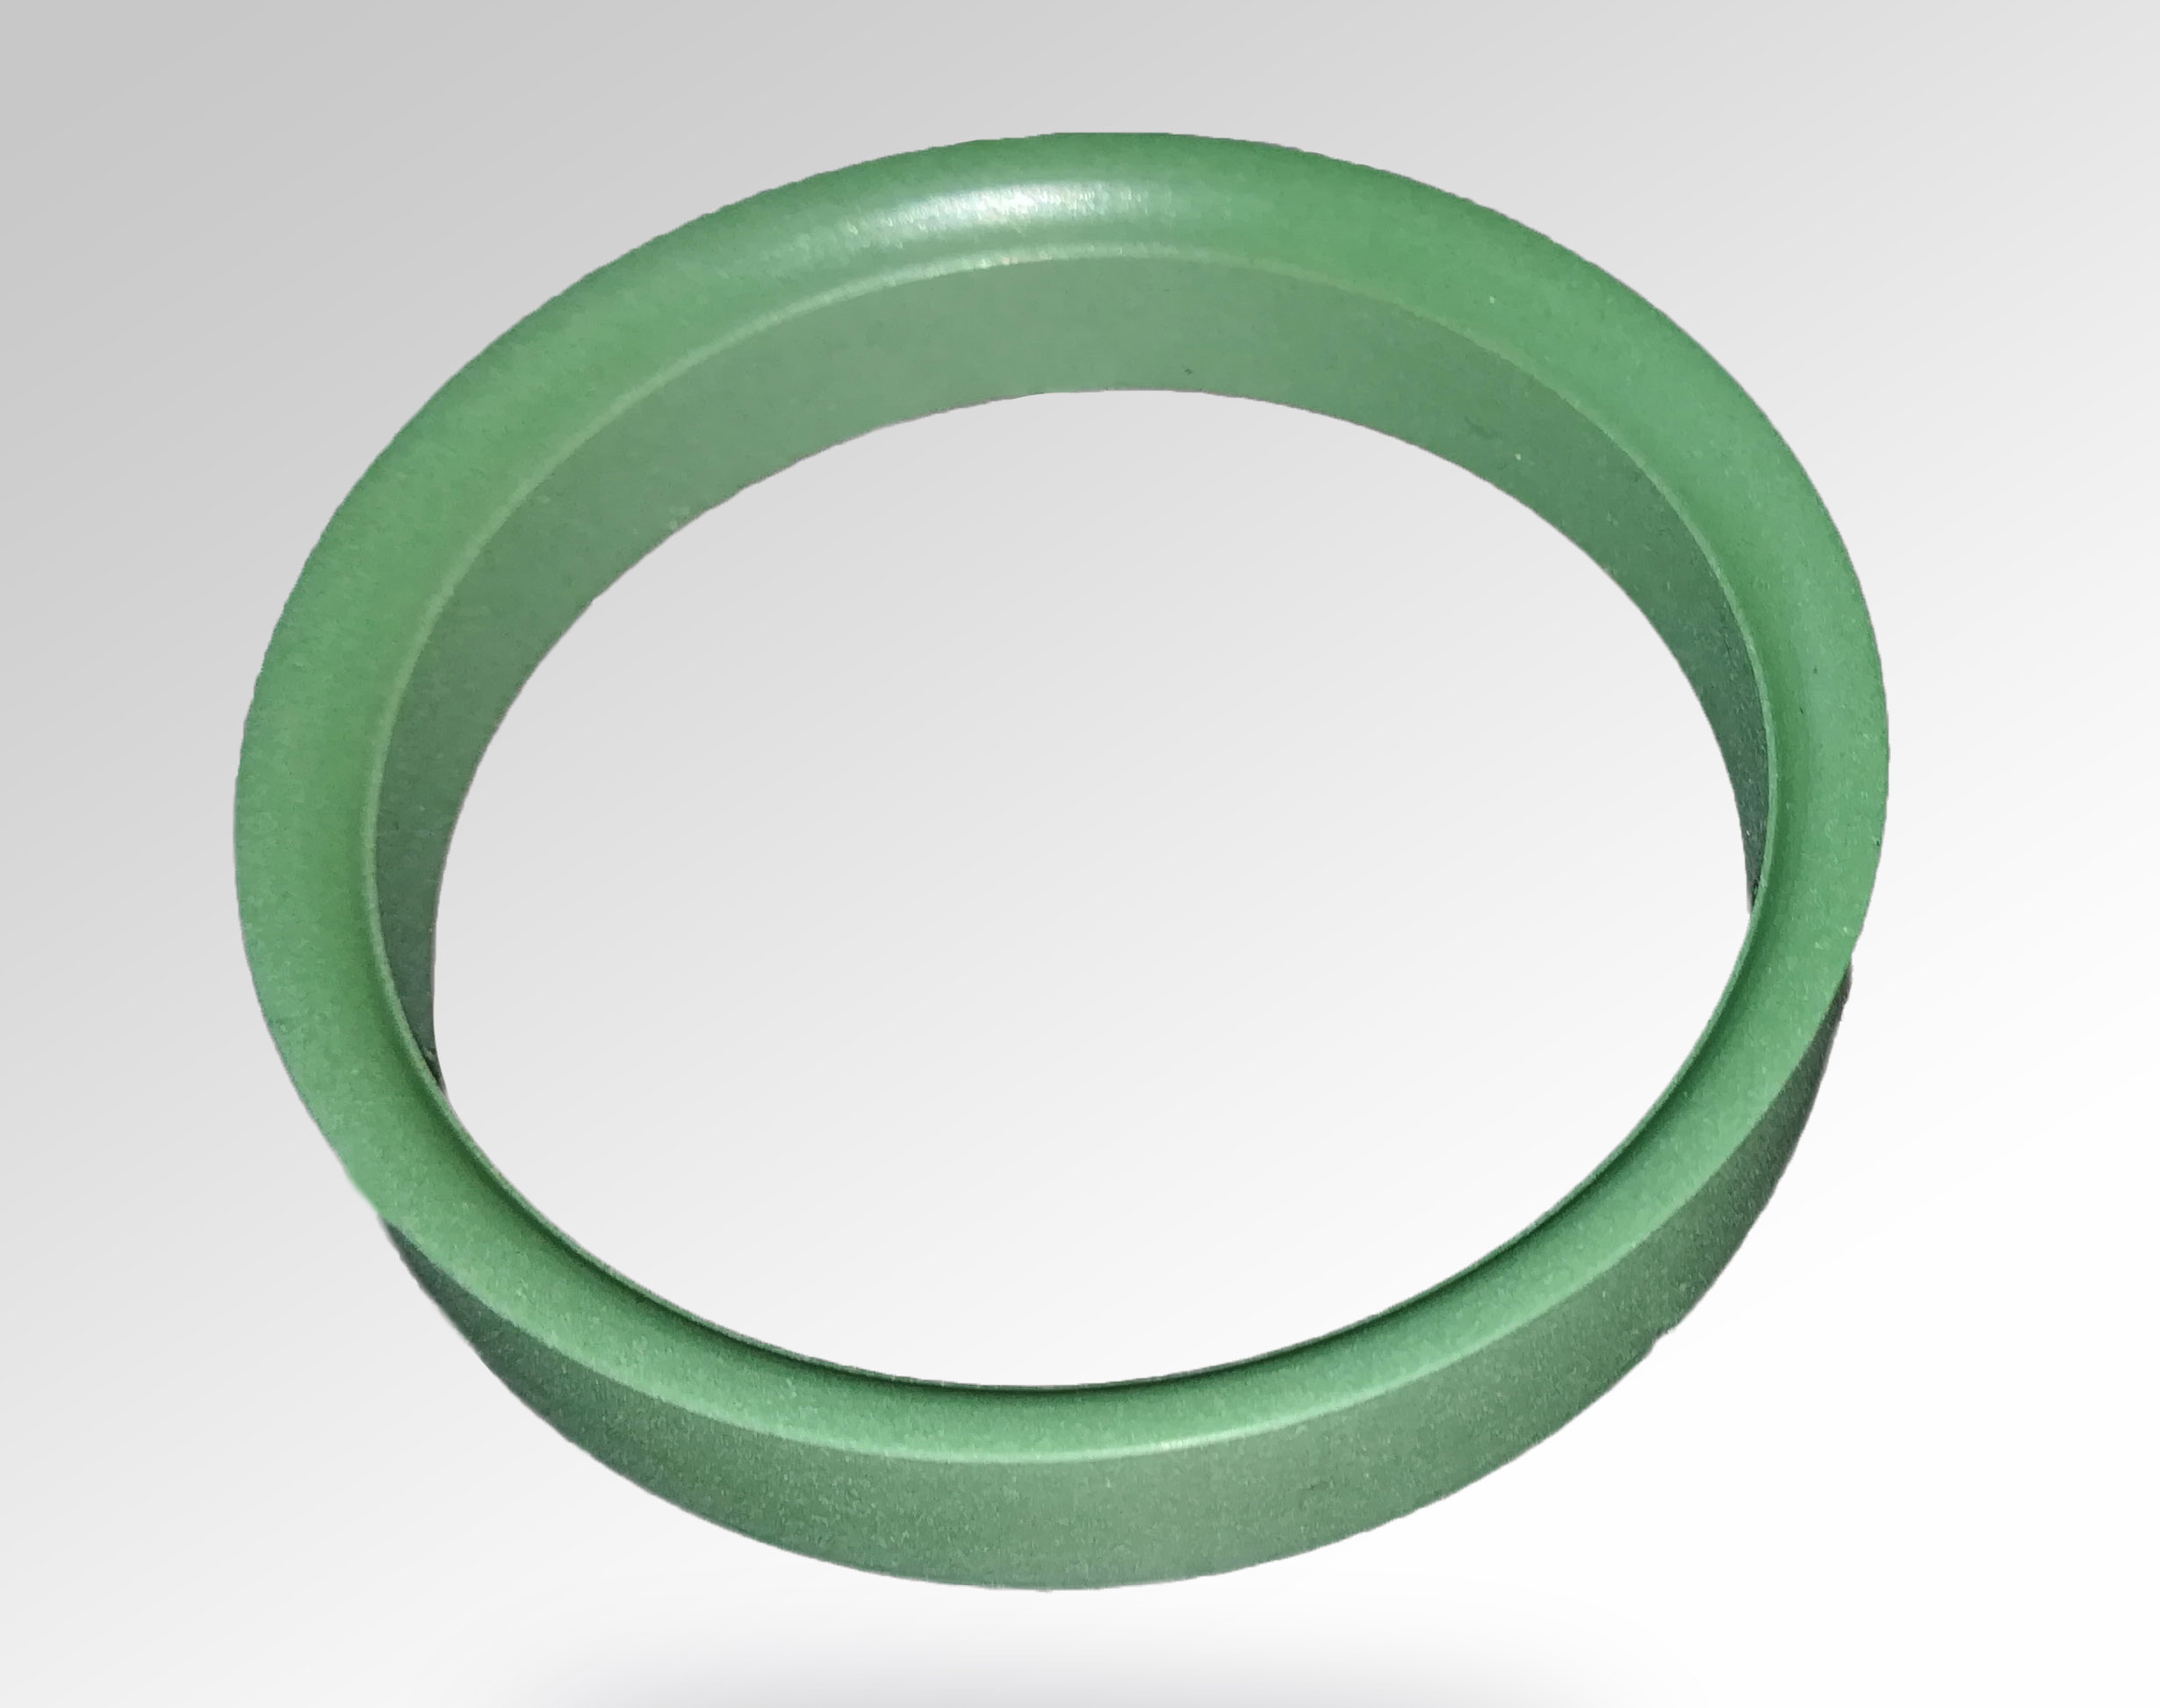 Victrex has designed a new polyether ether ketone (PEEK) polymer for sealing applications in the cryogenics industry.